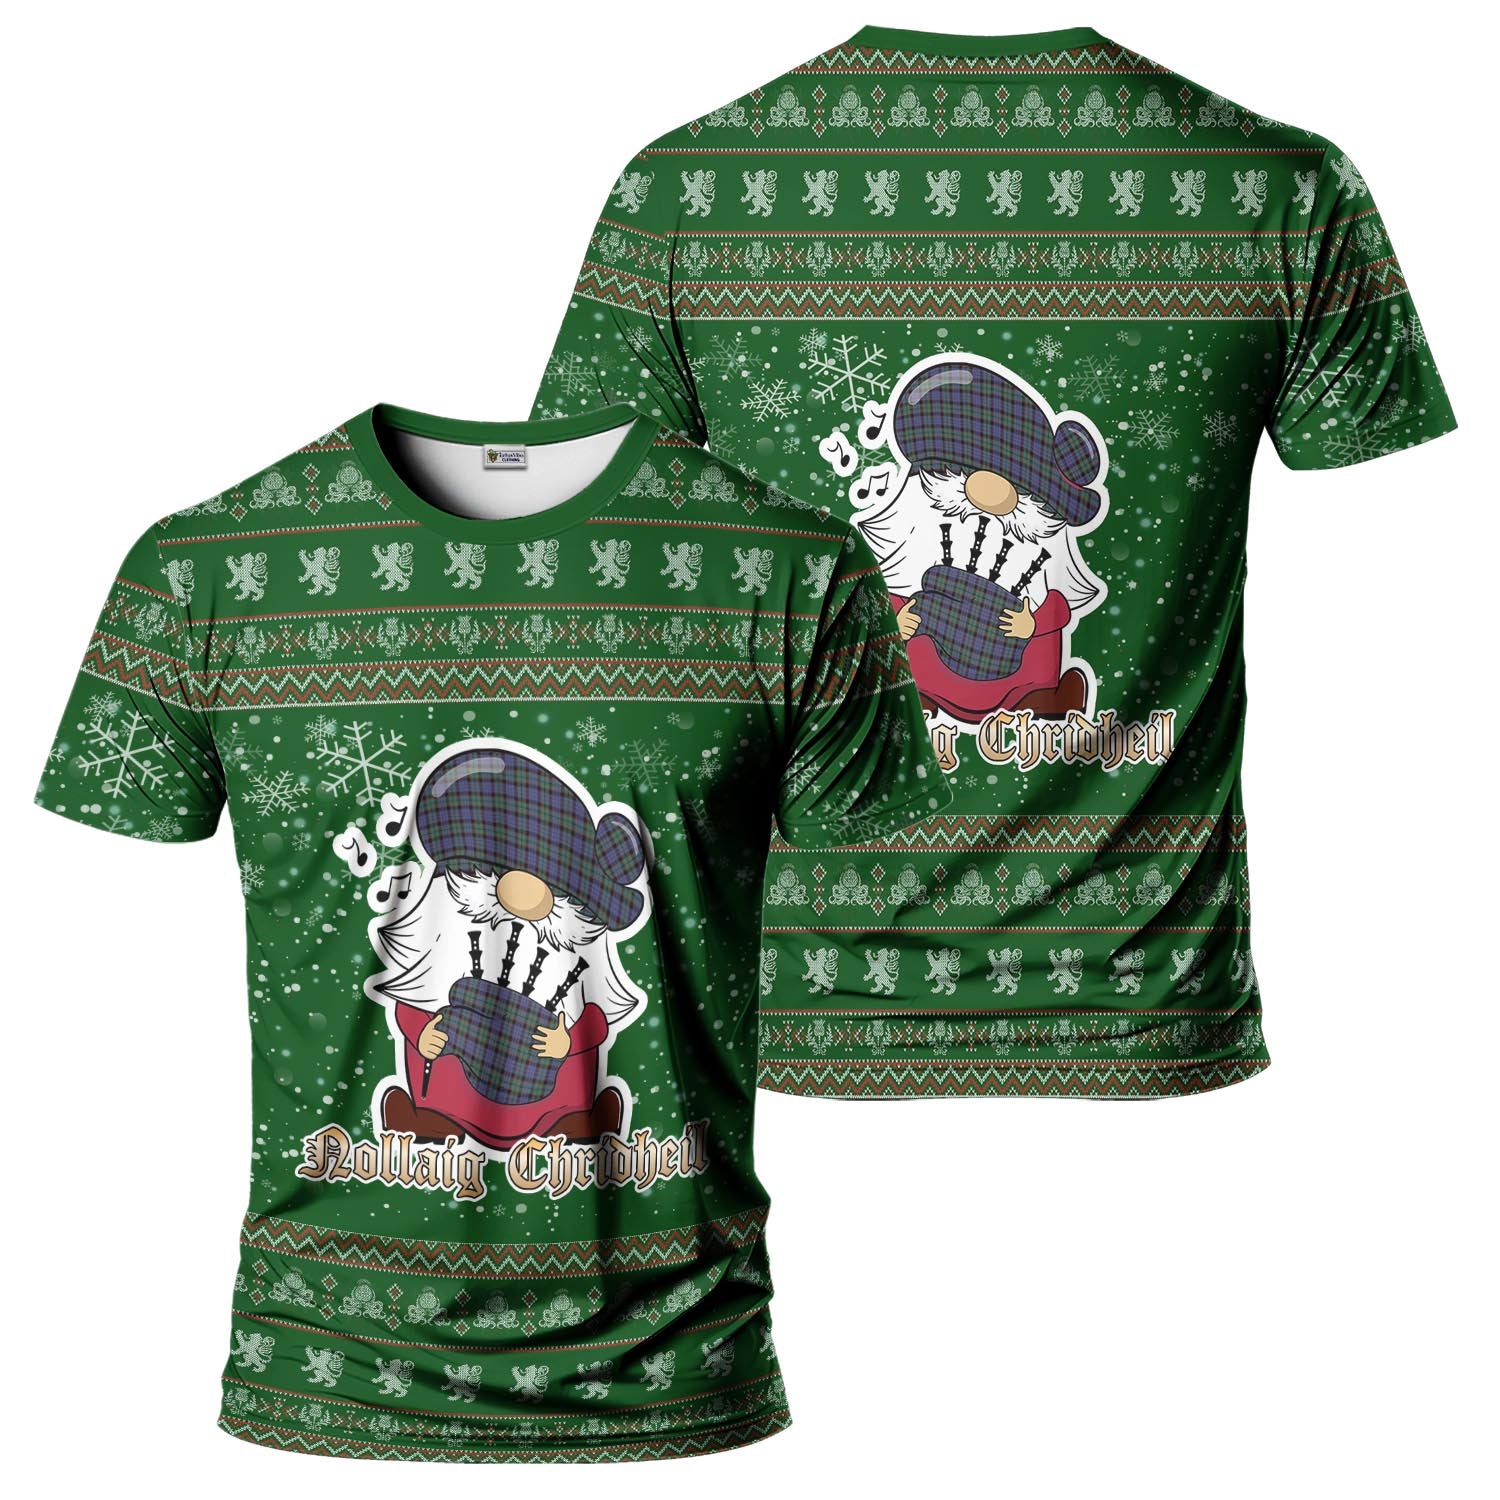 Fletcher Modern Clan Christmas Family T-Shirt with Funny Gnome Playing Bagpipes Men's Shirt Green - Tartanvibesclothing